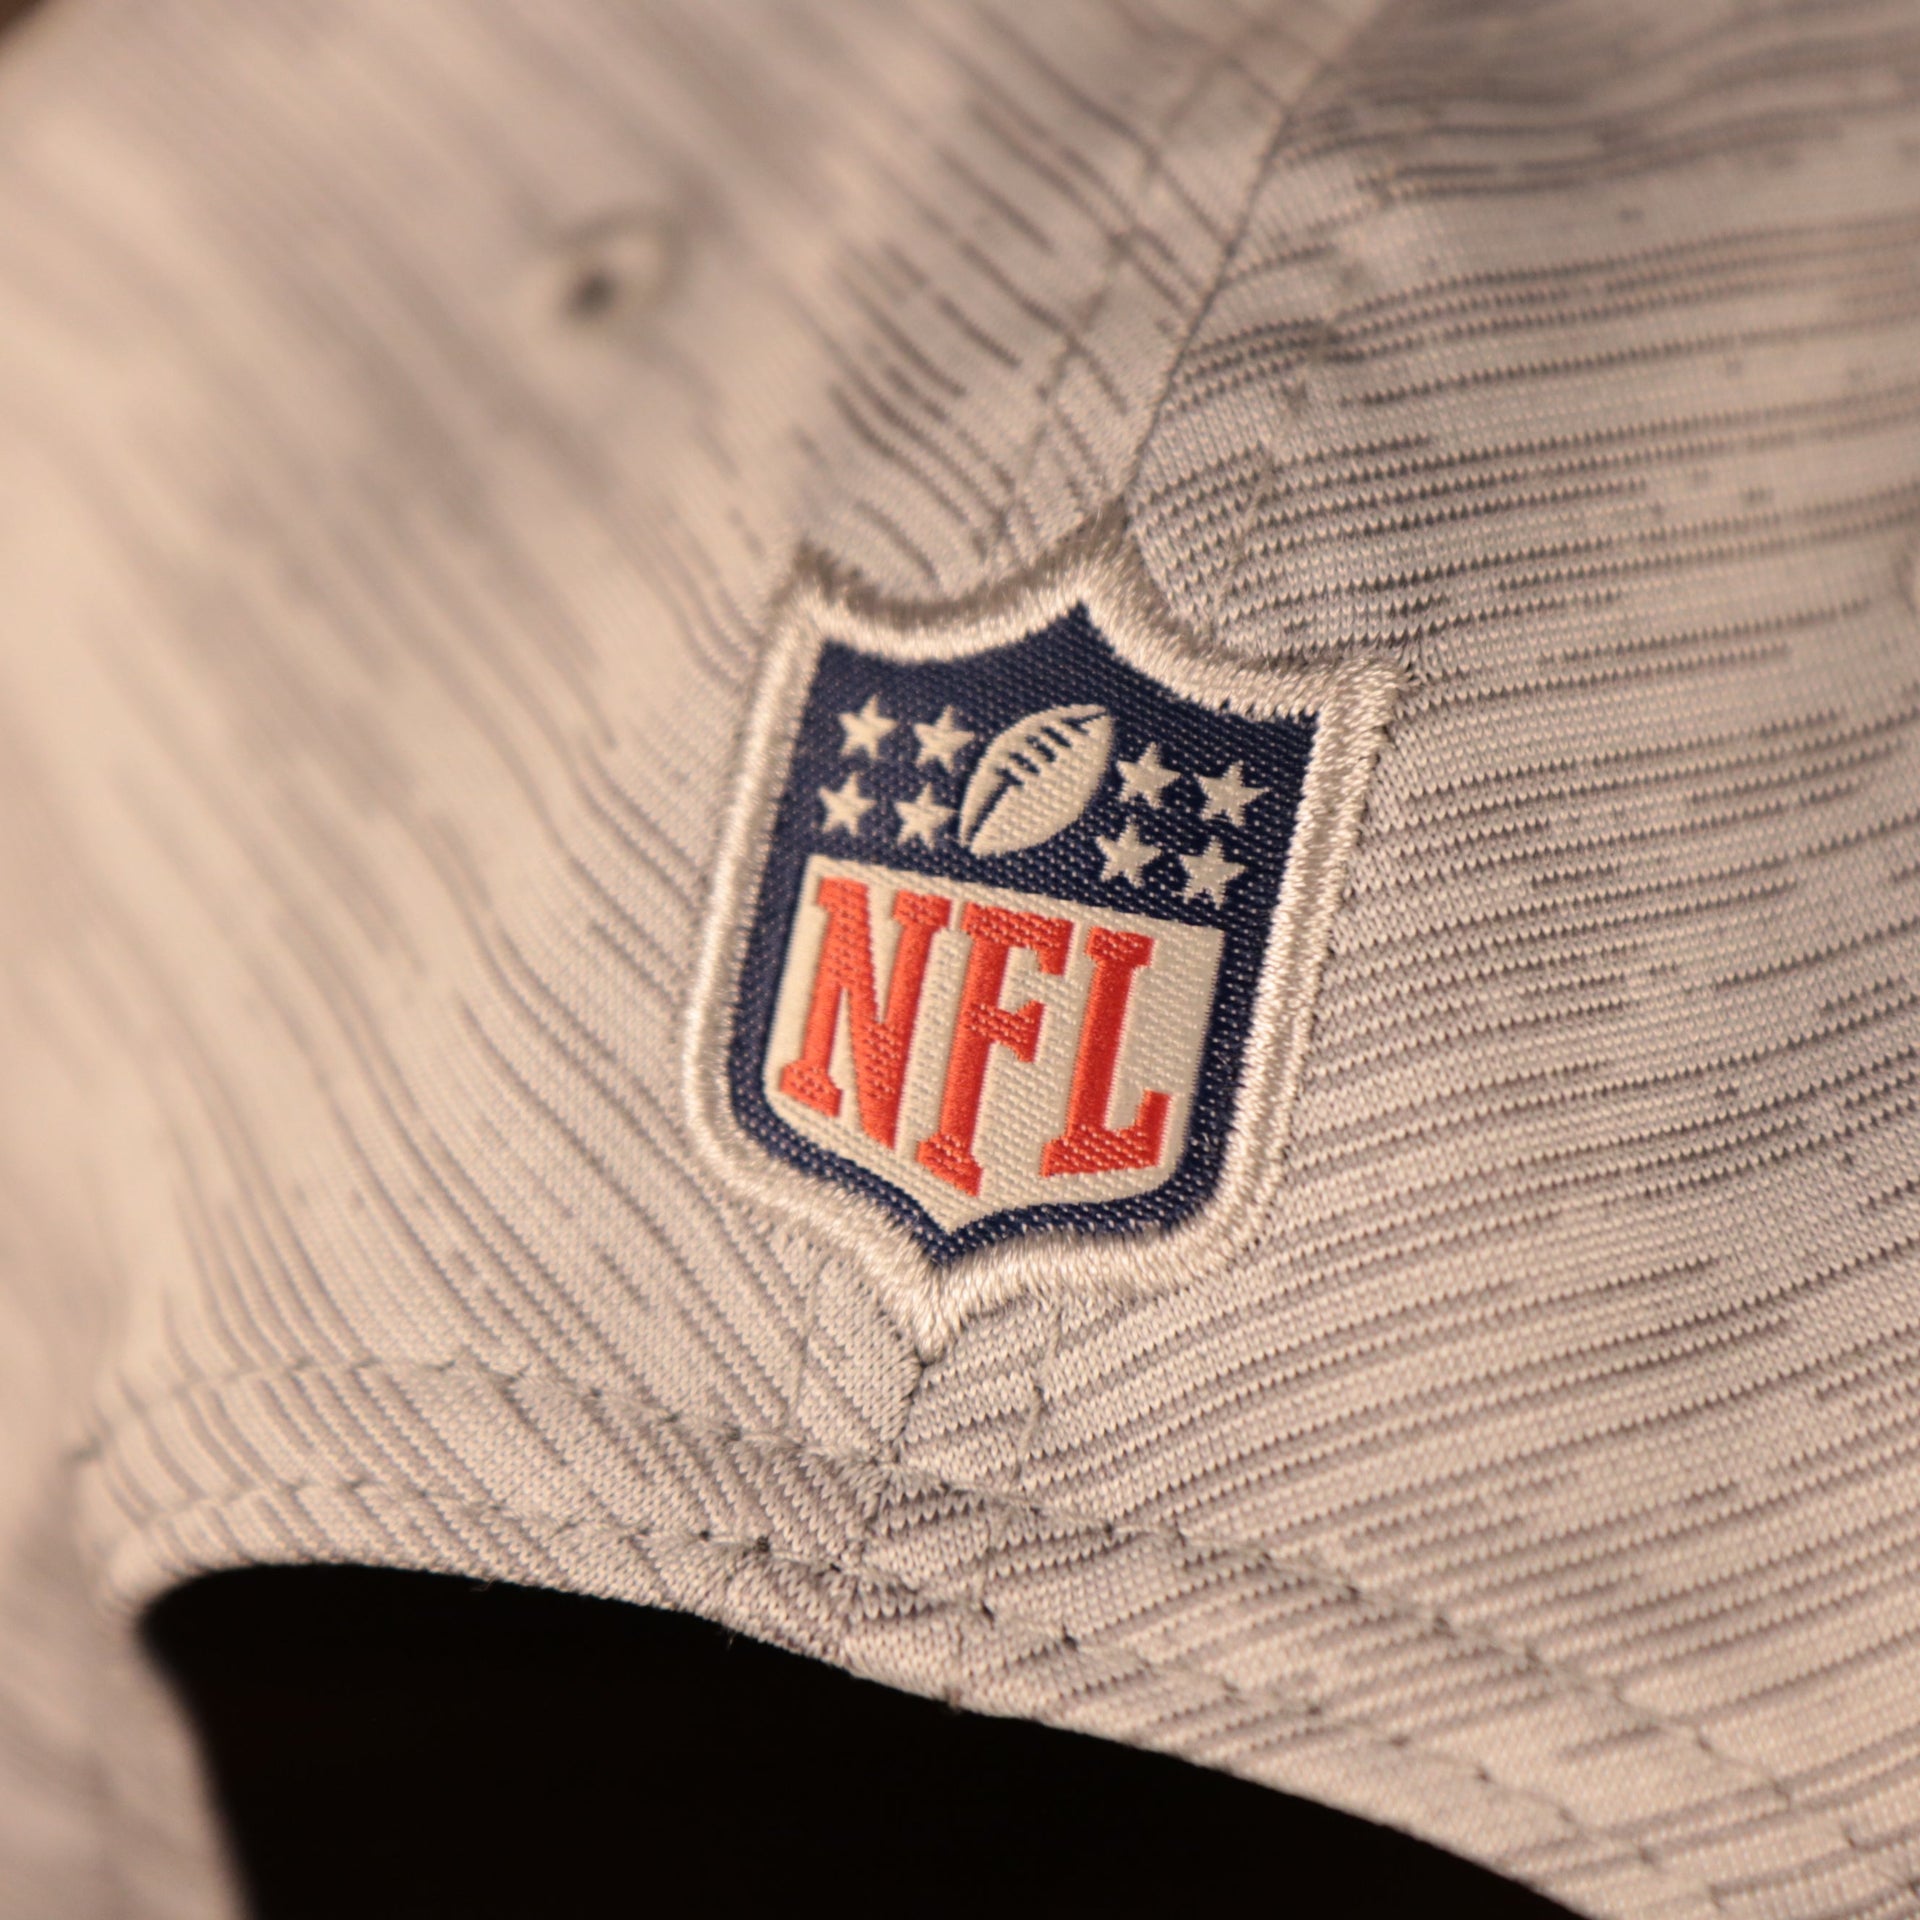 A closeup shot of the NFL patch at the back of the 2021 nfl on field snapback hat.